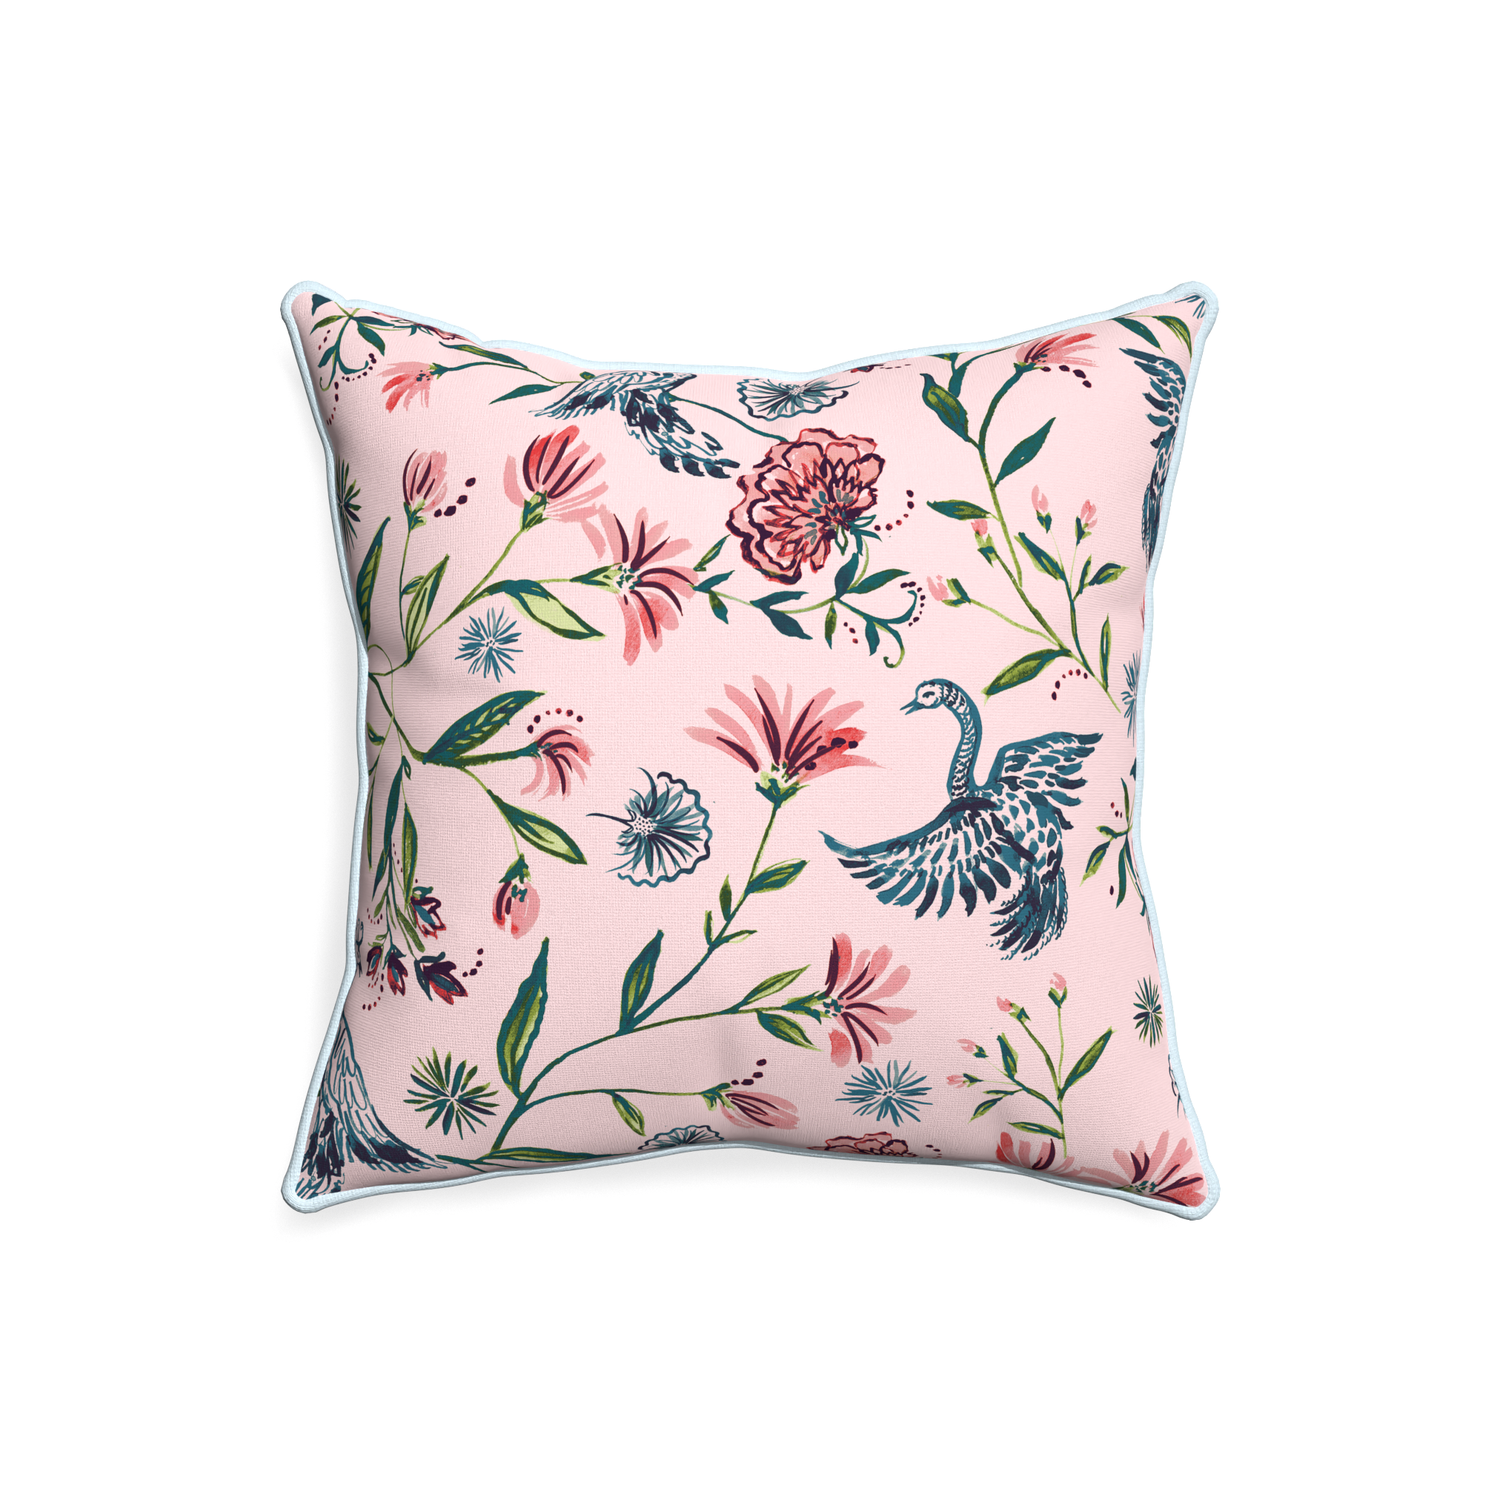 20-square daphne rose custom pillow with powder piping on white background